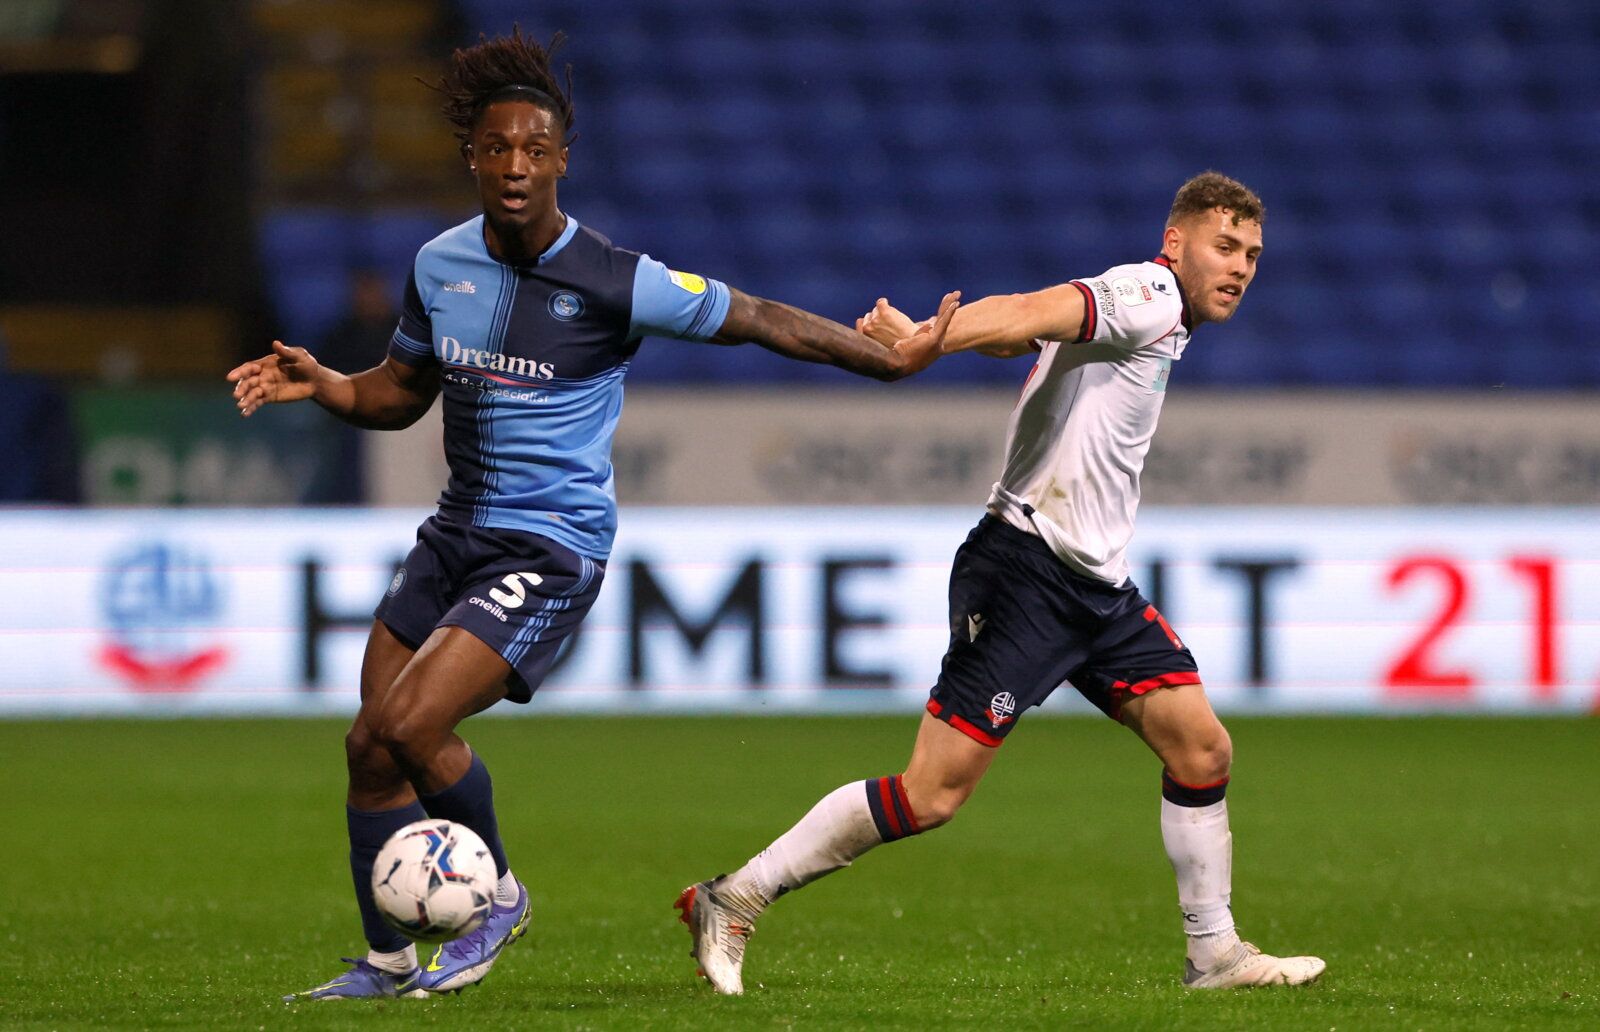 Soccer Football - League One - Bolton Wanderers v Wycombe Wanderers - University of Bolton Stadium, Bolton, Britain - January 11, 2022 Wycombe Wanderers' Anthony Stewart in action with Bolton Wanderers' Dion Charles   Action Images/Jason Cairnduff  EDITORIAL USE ONLY. No use with unauthorized audio, video, data, fixture lists, club/league logos or 